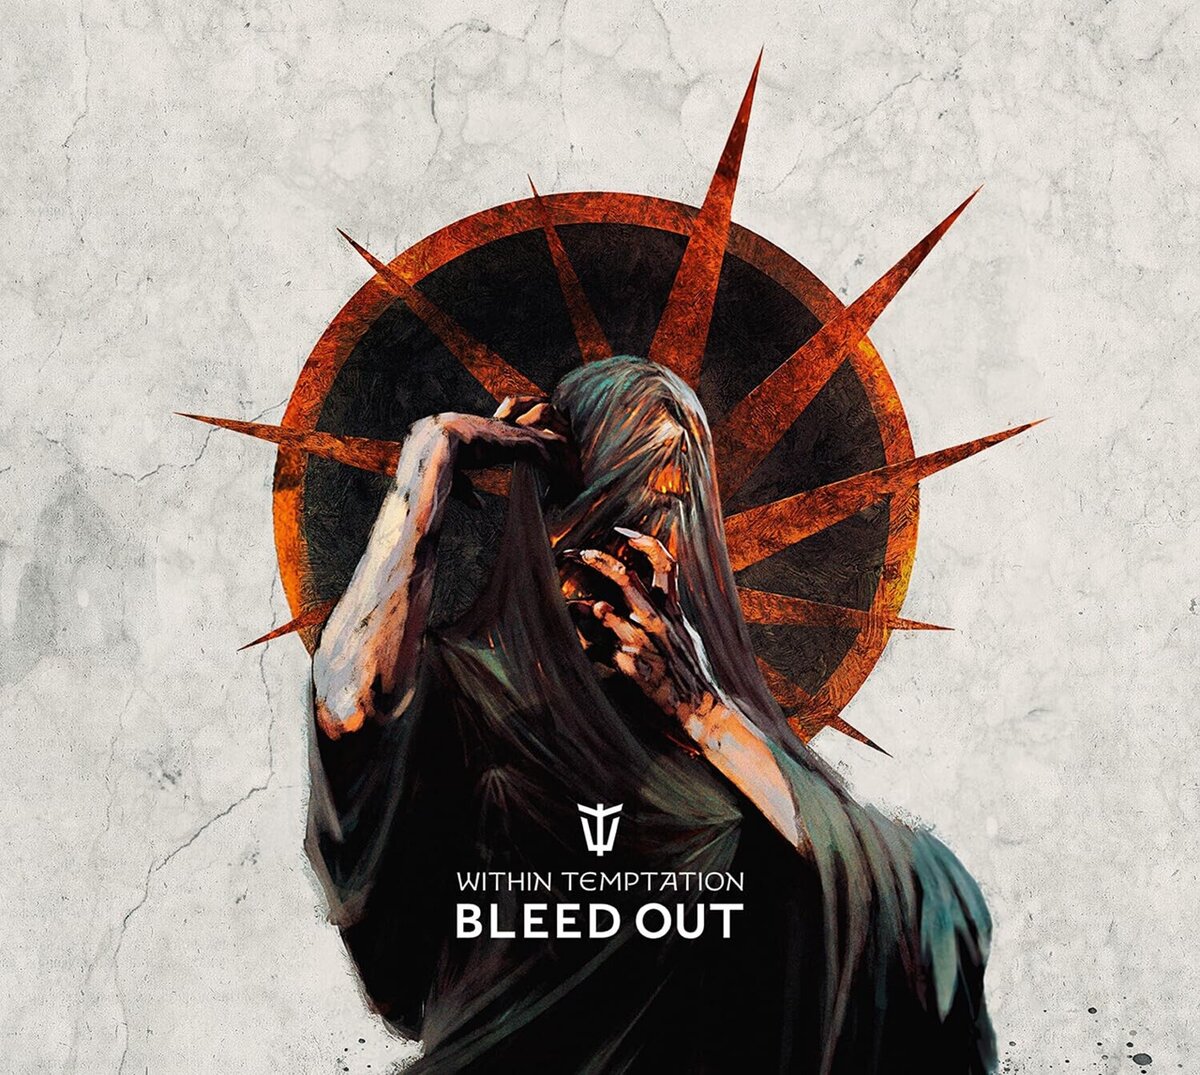 Within Temptation Bleed out. Bleed out логотип. Fears to Fathom - Ironbark Lookout обложка. Within temptation bleed